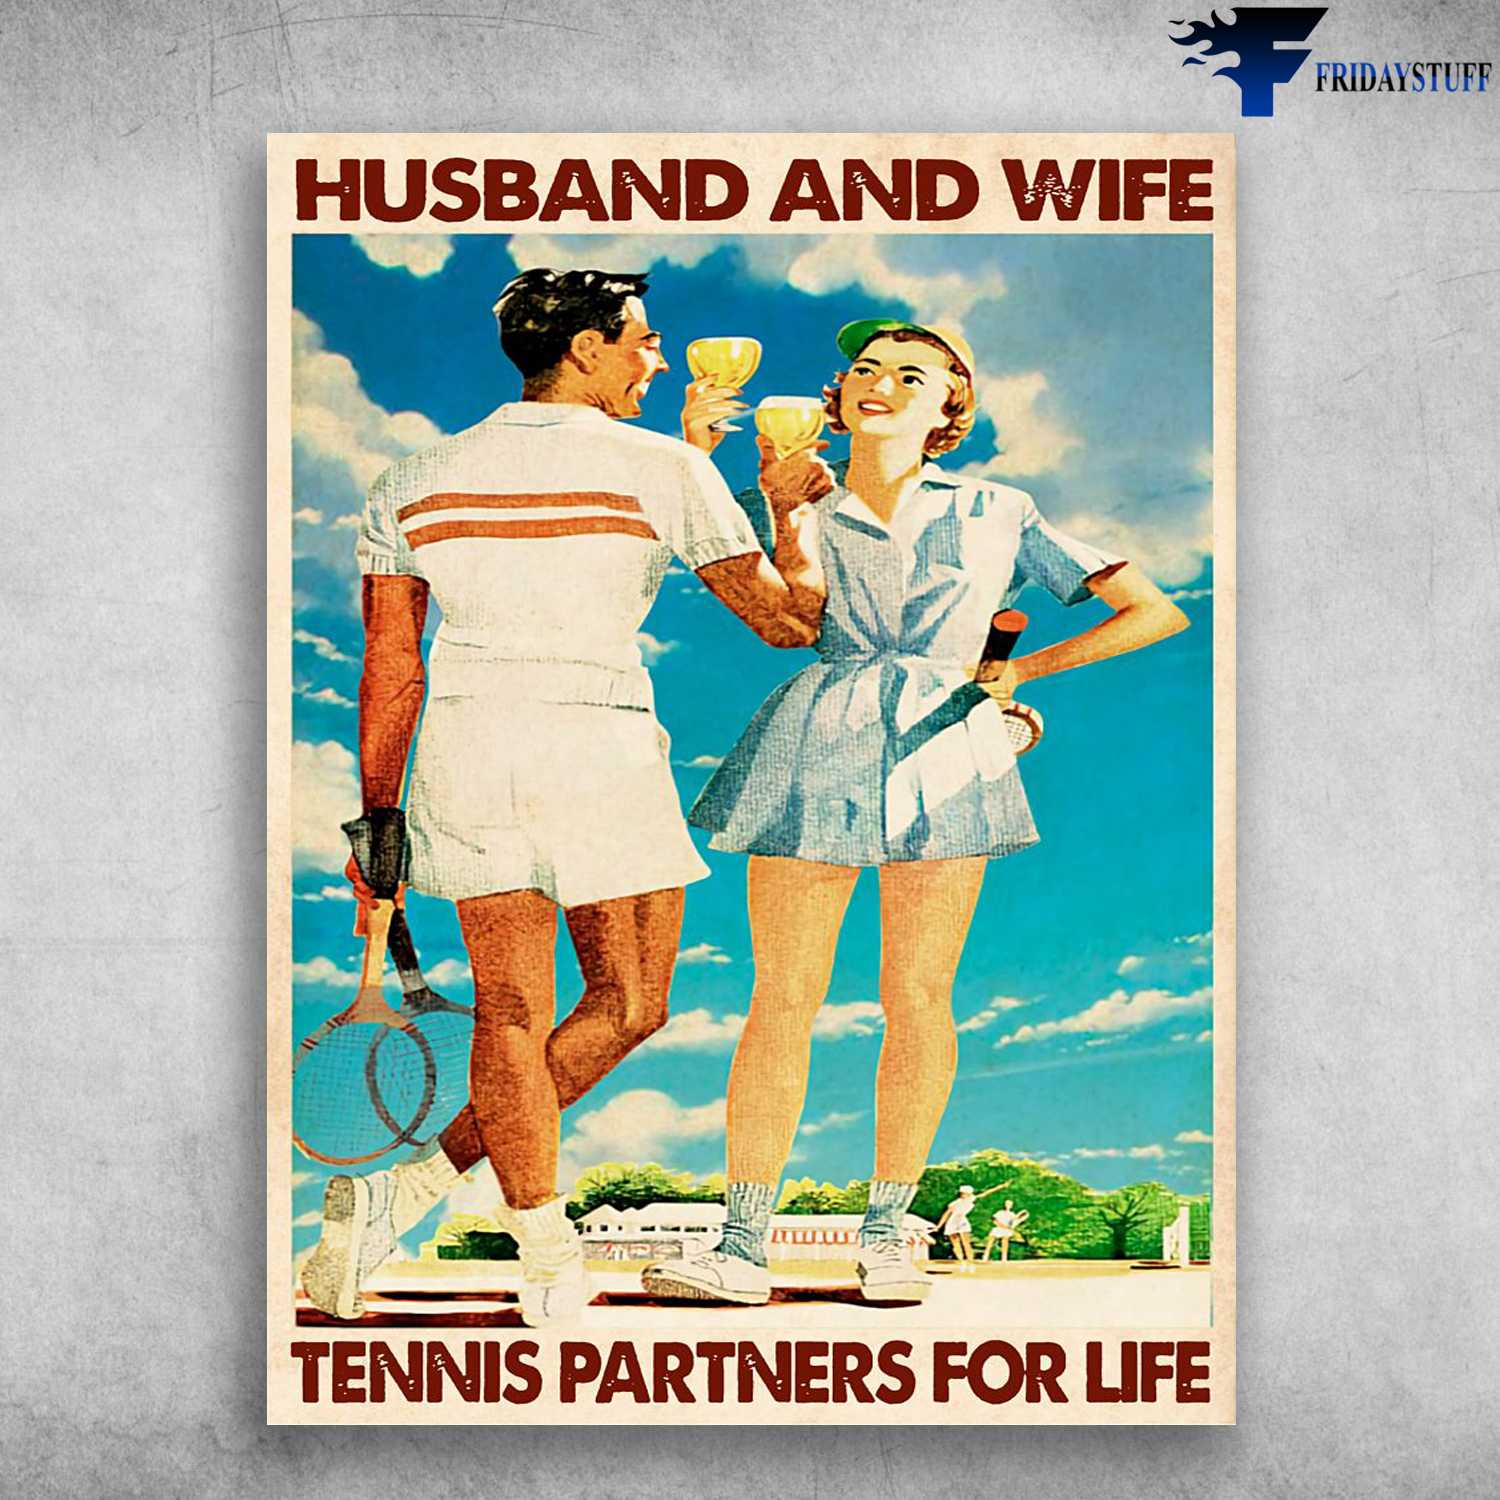 Tennis Lover, Tennis Couple - Husband And Wife, Tennis Partners For Life